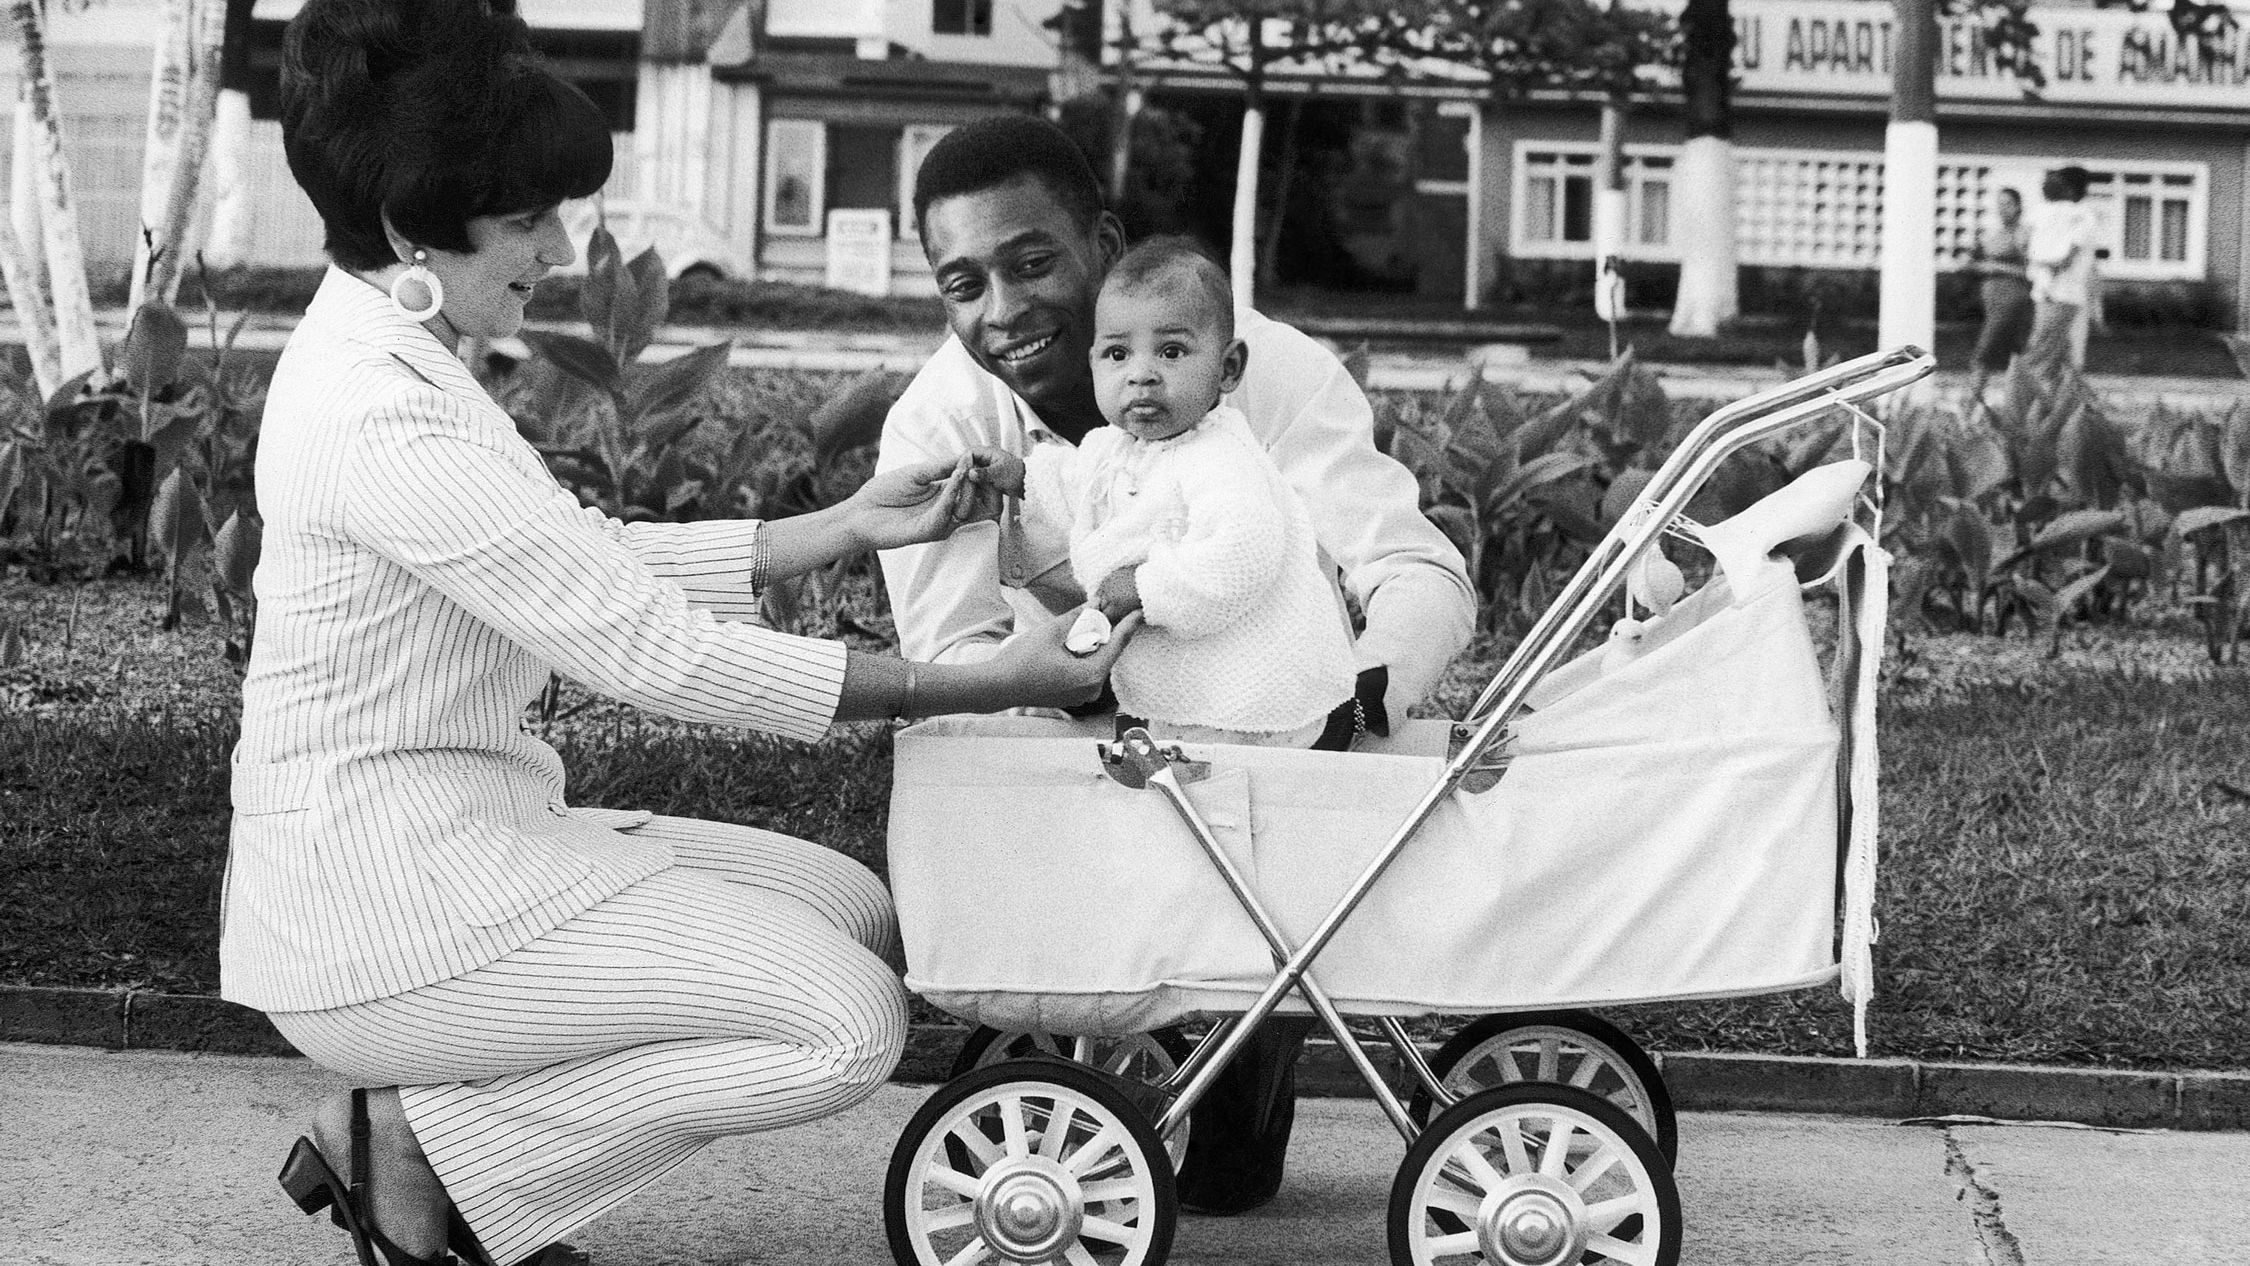 Pelé and his wife, Rosemeri, take their young daughter, Kely, out for a walk in 1967. It was their first child together. They would have three children in all before divorcing in 1978.